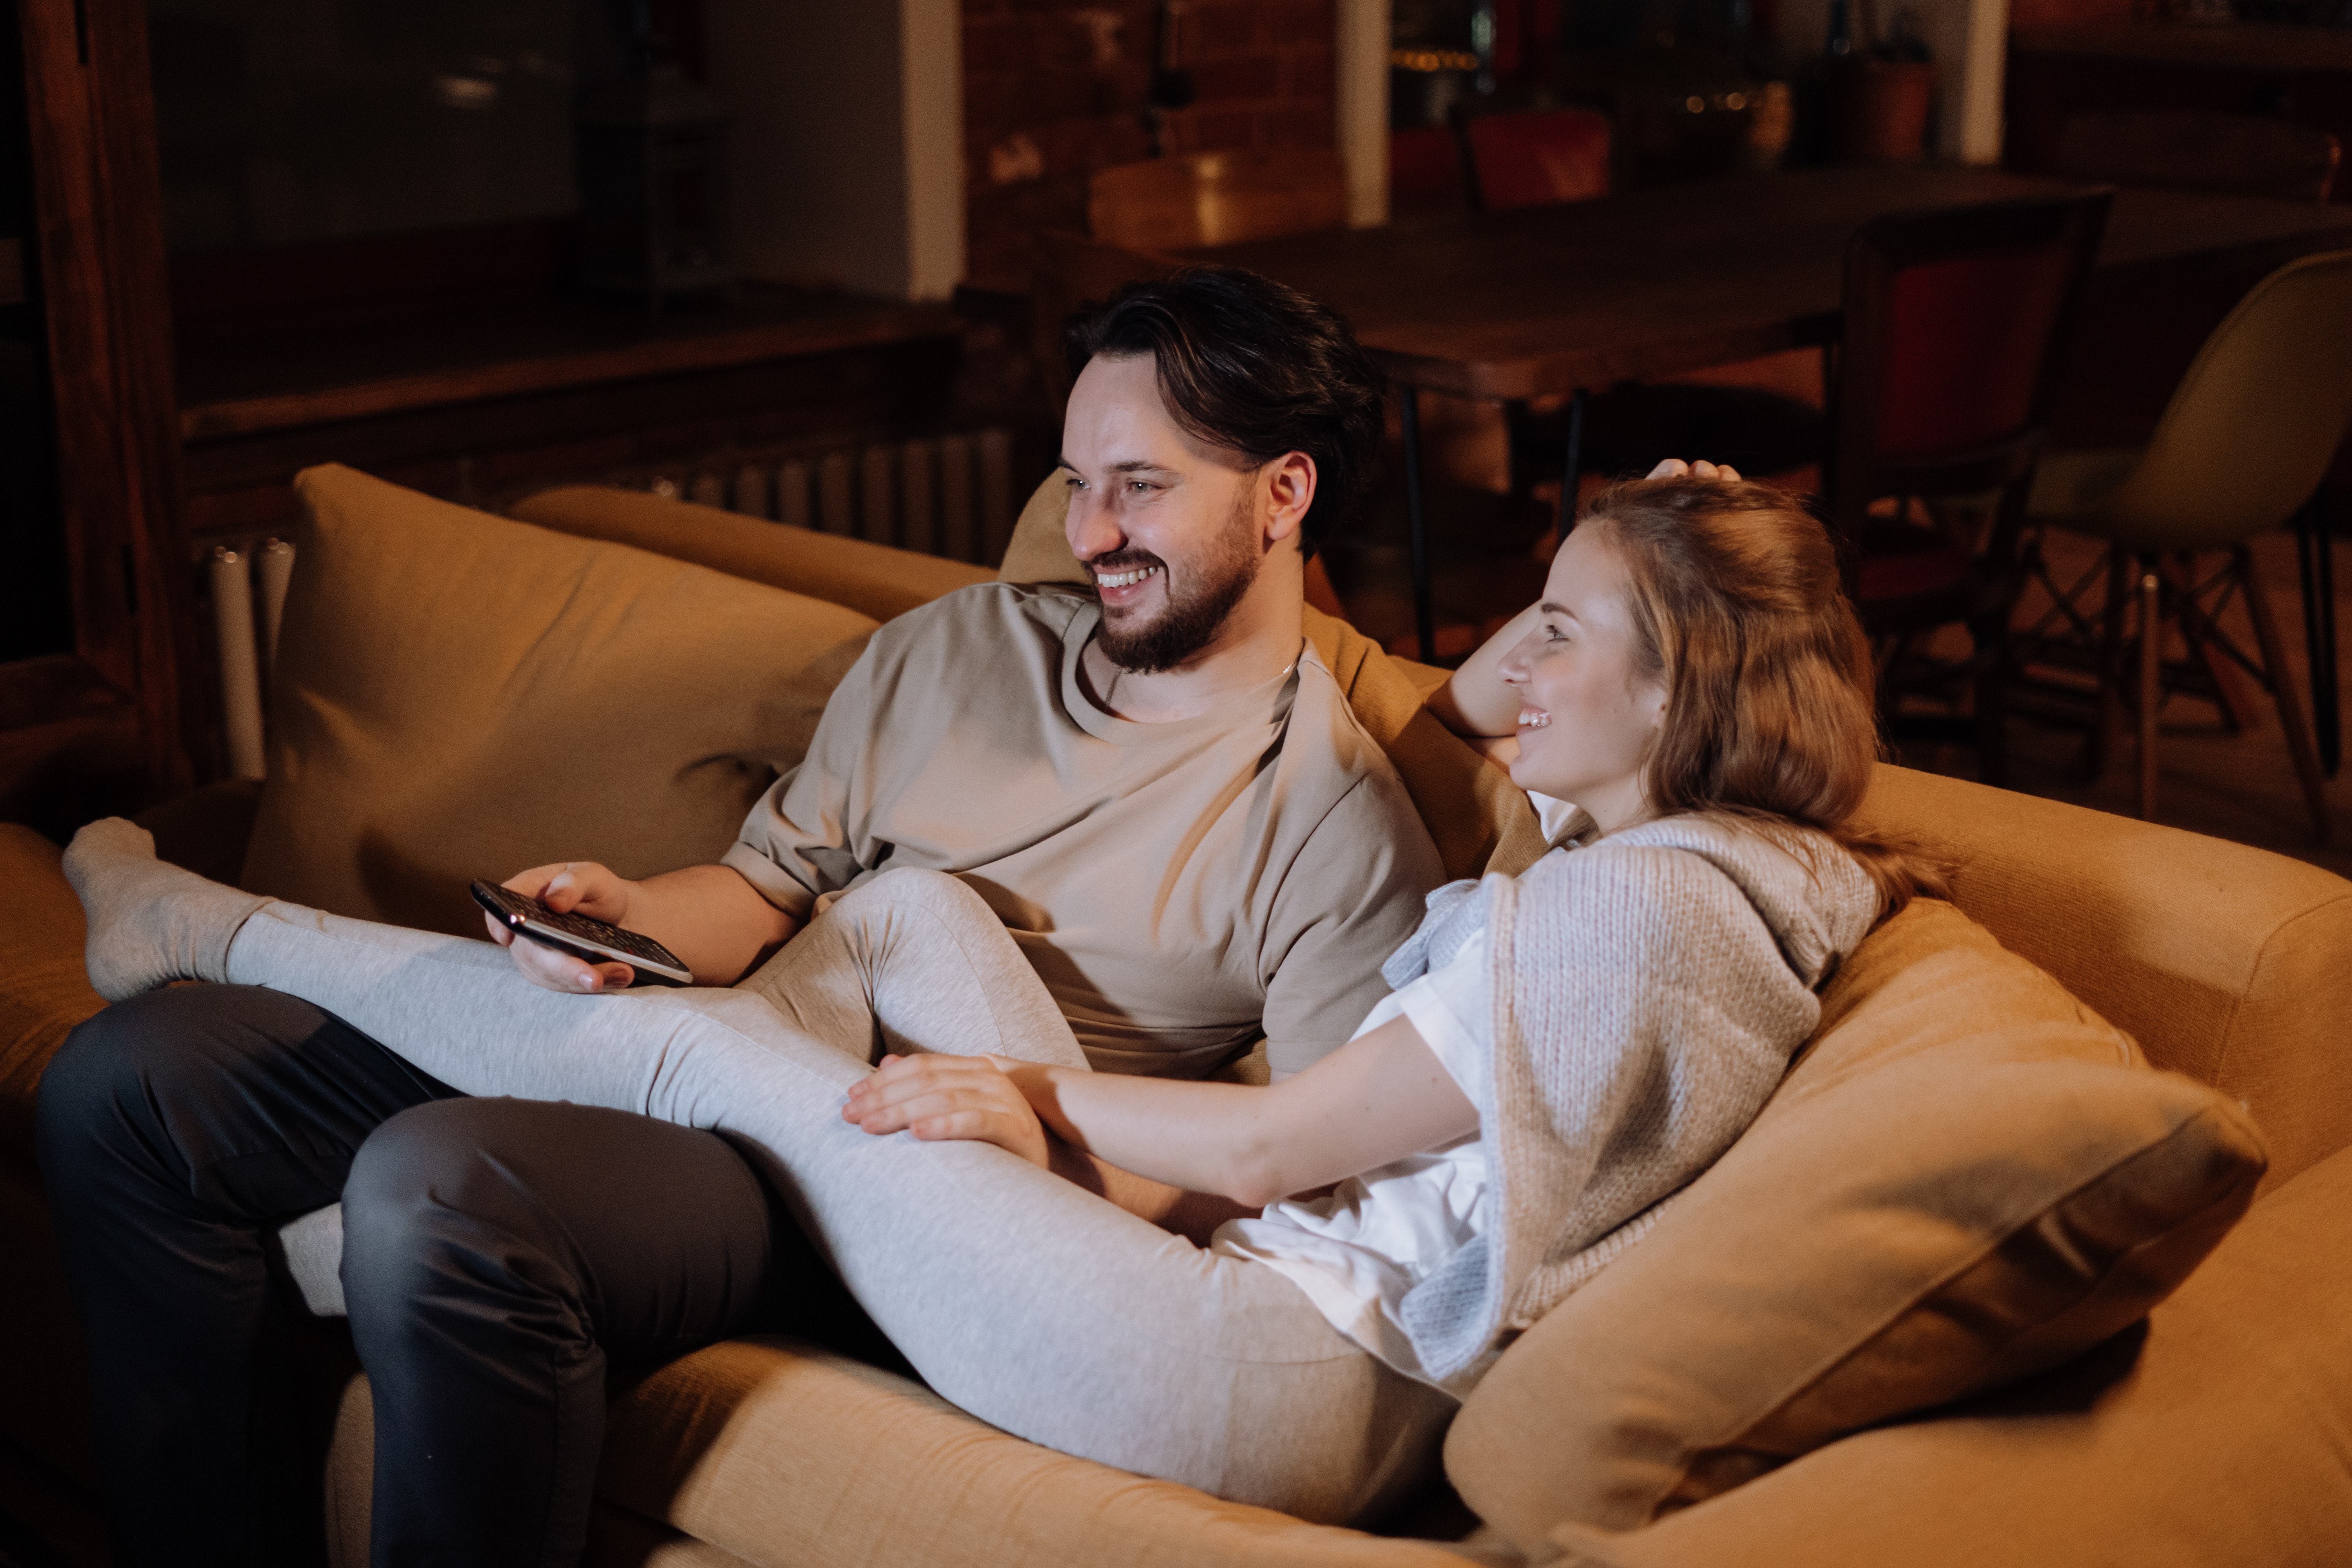 A couple lounges on the couch while watching television. | Source: Pexels